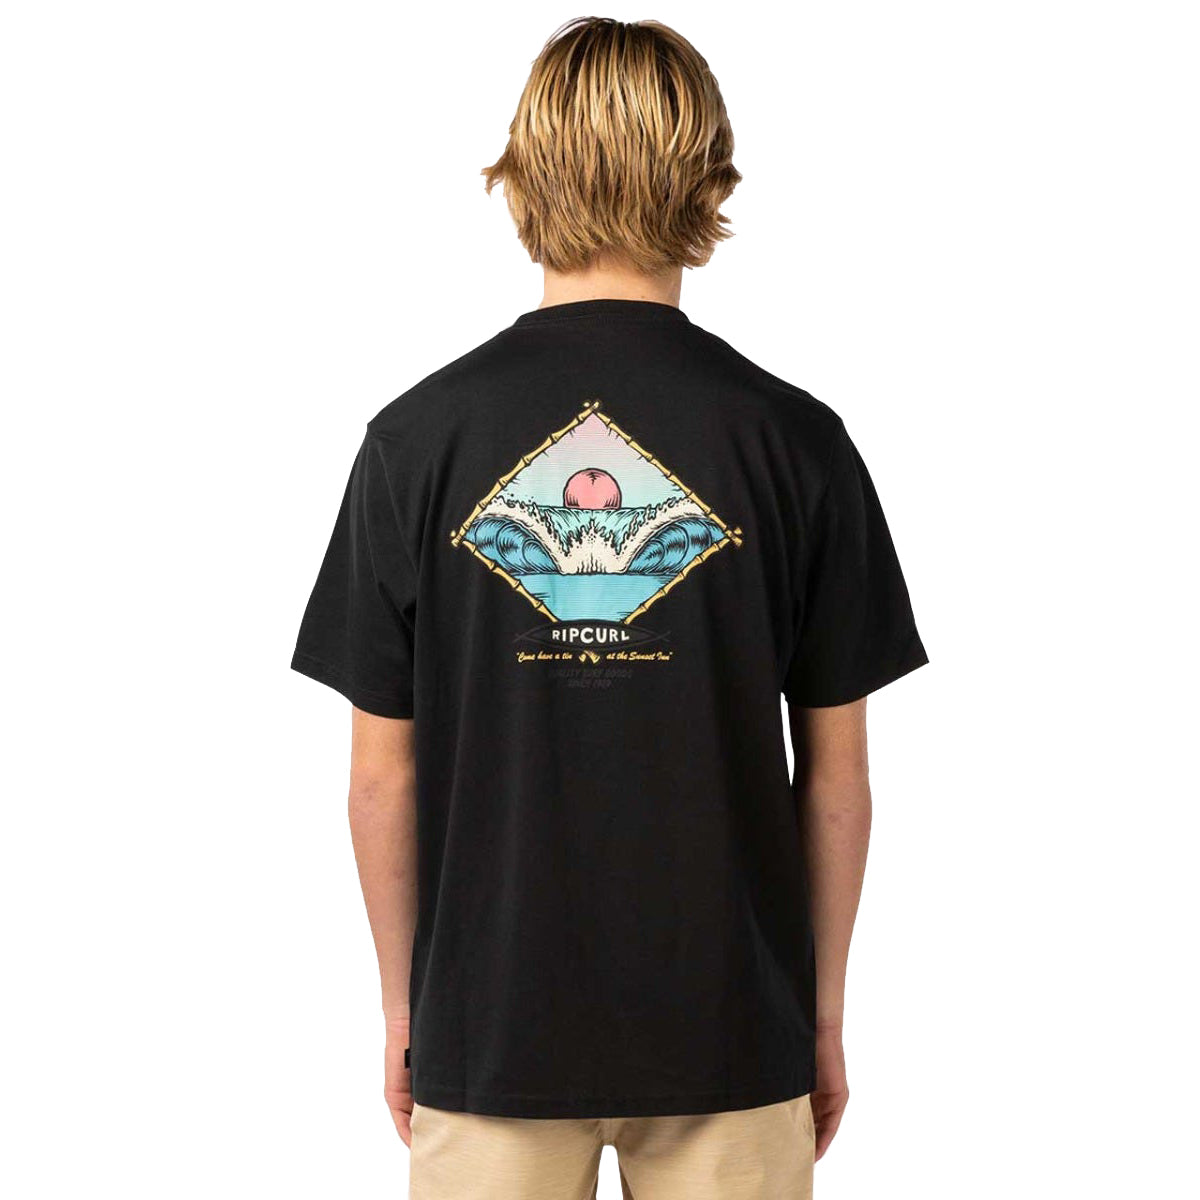 Rip Curl Reflection SS Tee 0090-Black S